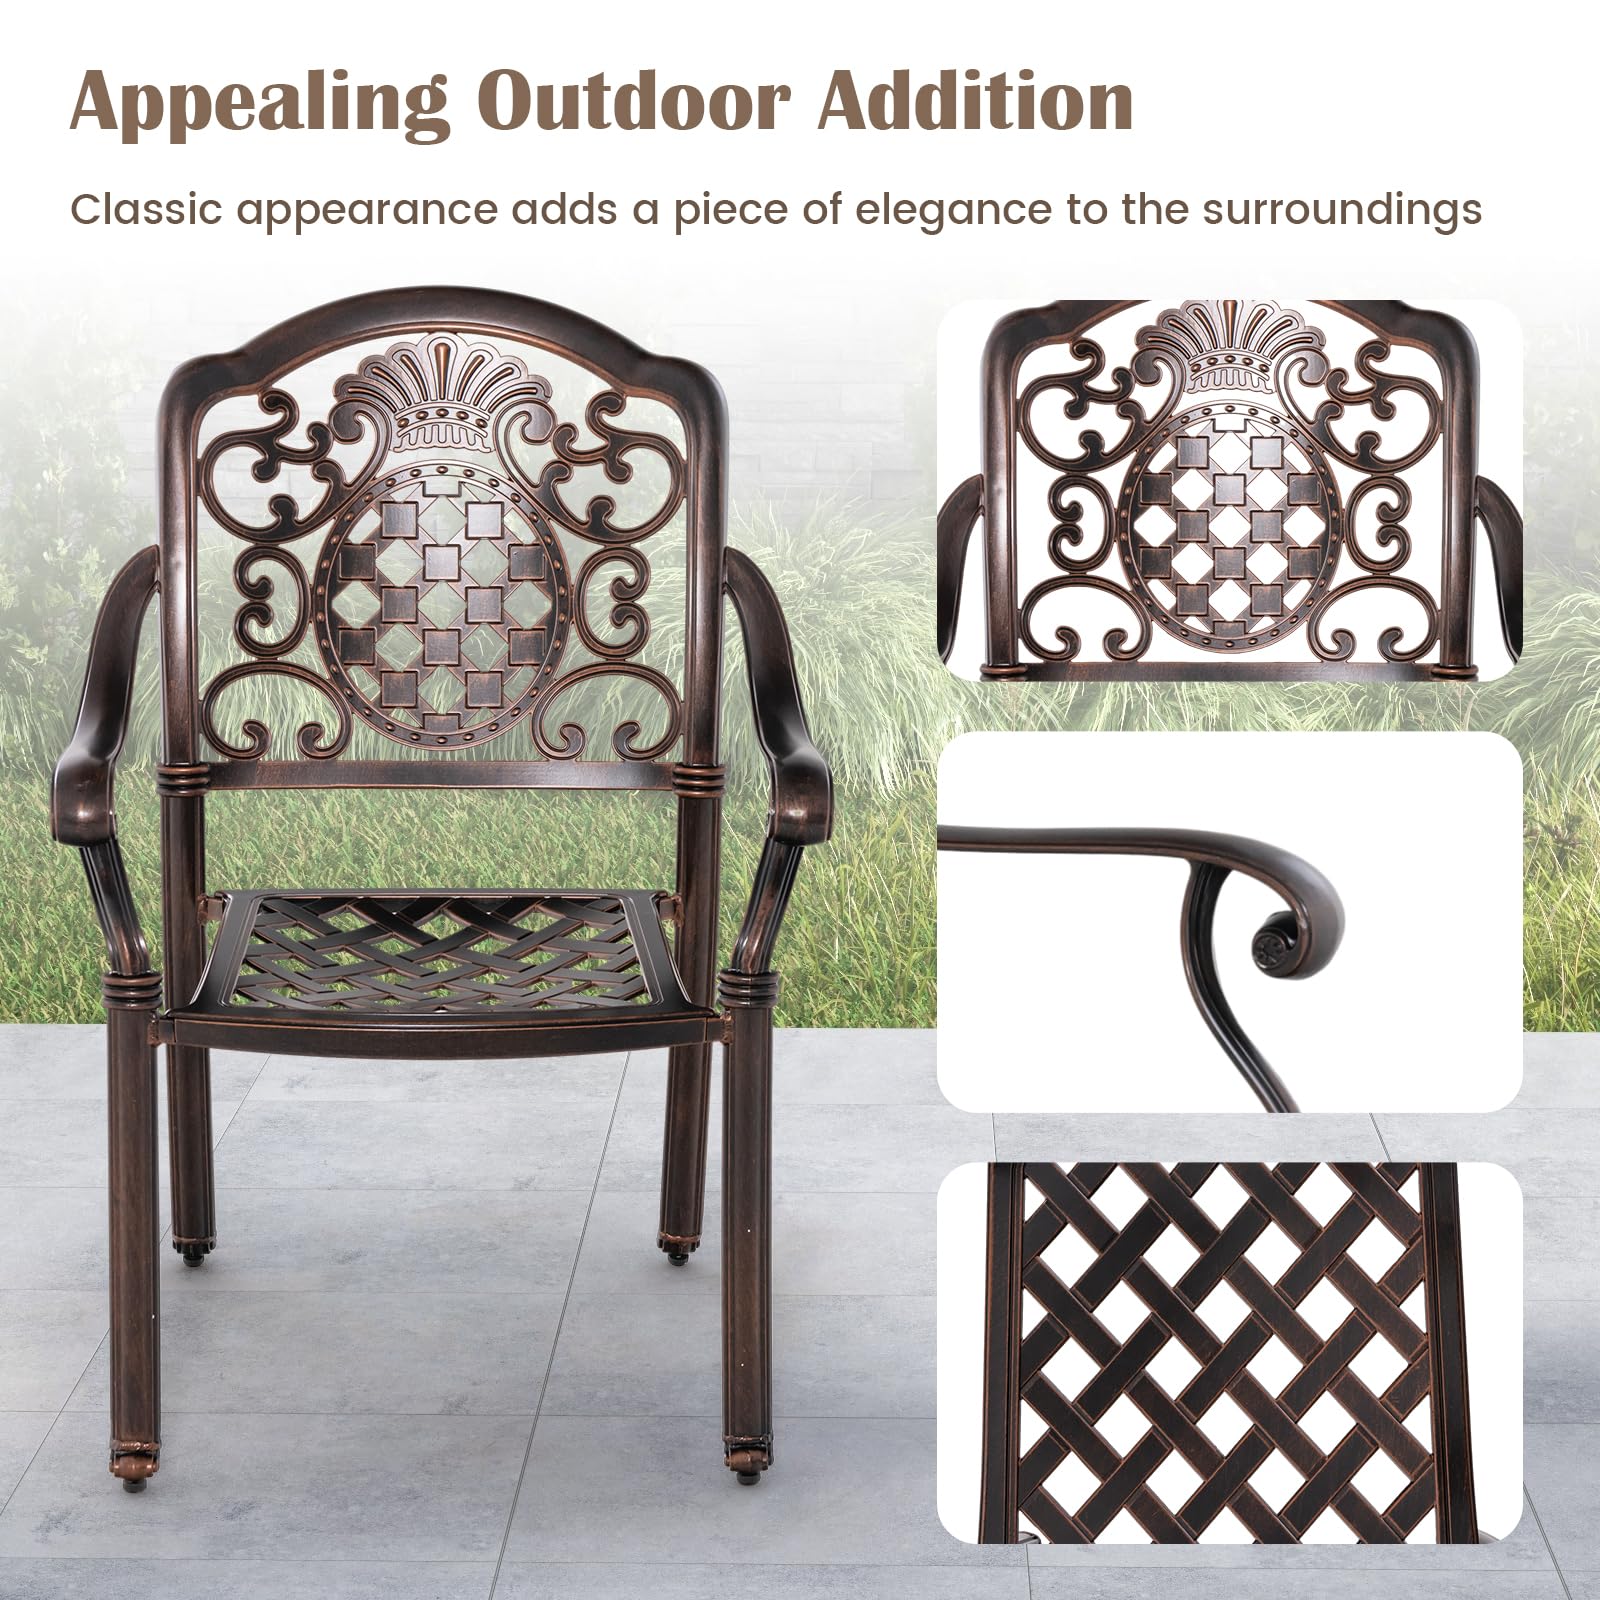 Giantex Patio Chairs Set of 2, Easy Assembly Stackable Cast Aluminum Outdoor Chairs with Armrest & Adjustable Footpads